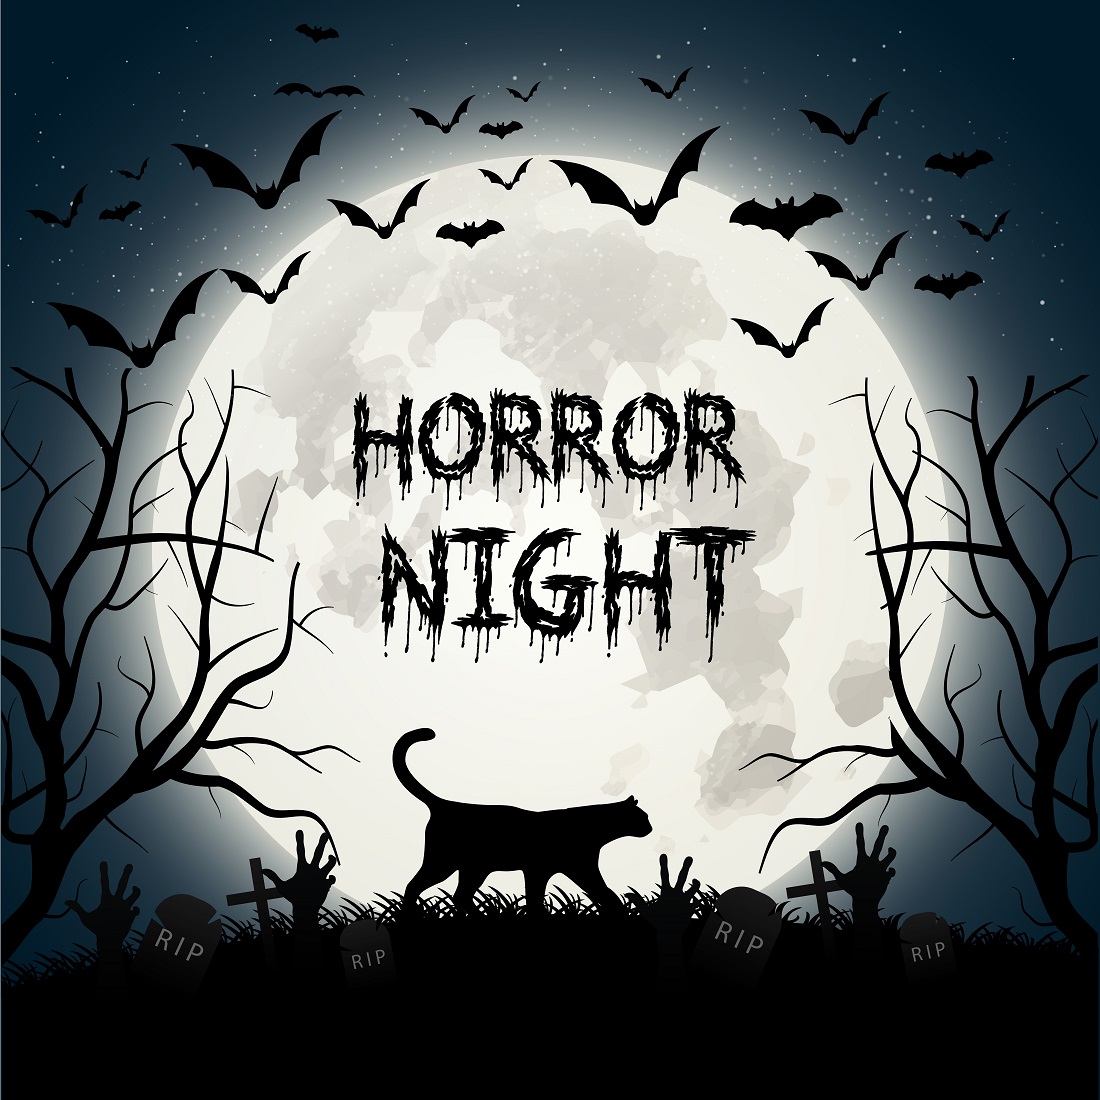 Creepy Halloween background with cat bats preview image.